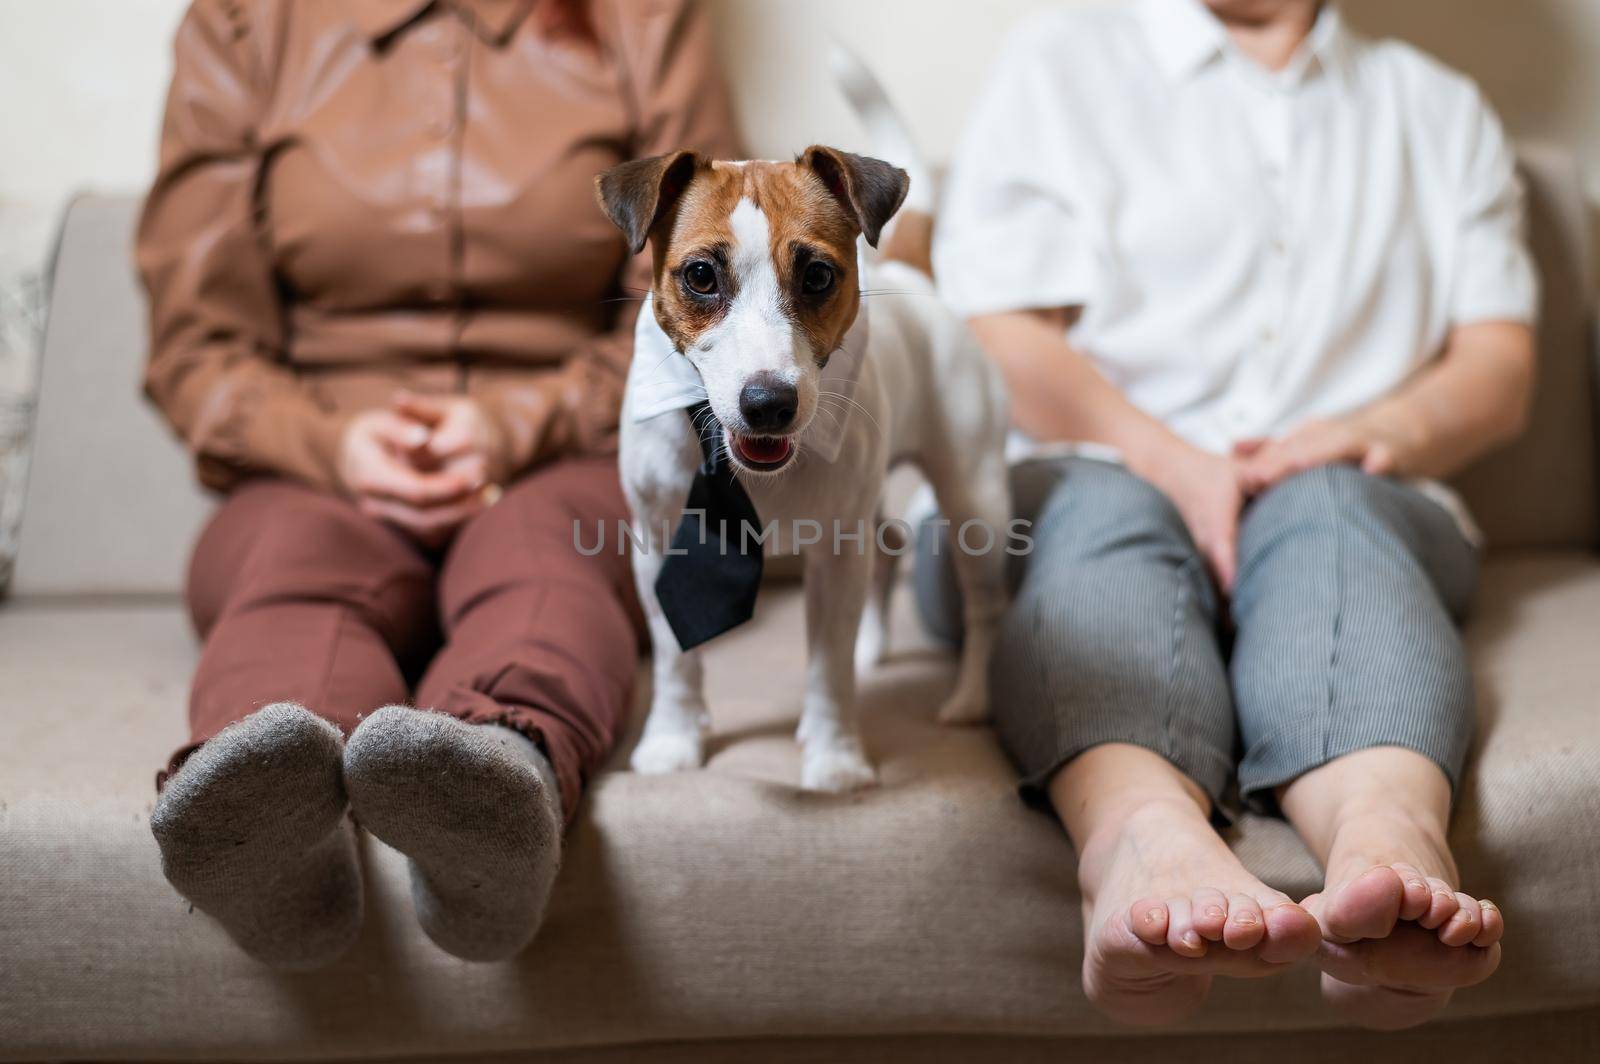 A cute dog Jack Russell Terrier is wearing a tie and sitting with two women on the couch by mrwed54